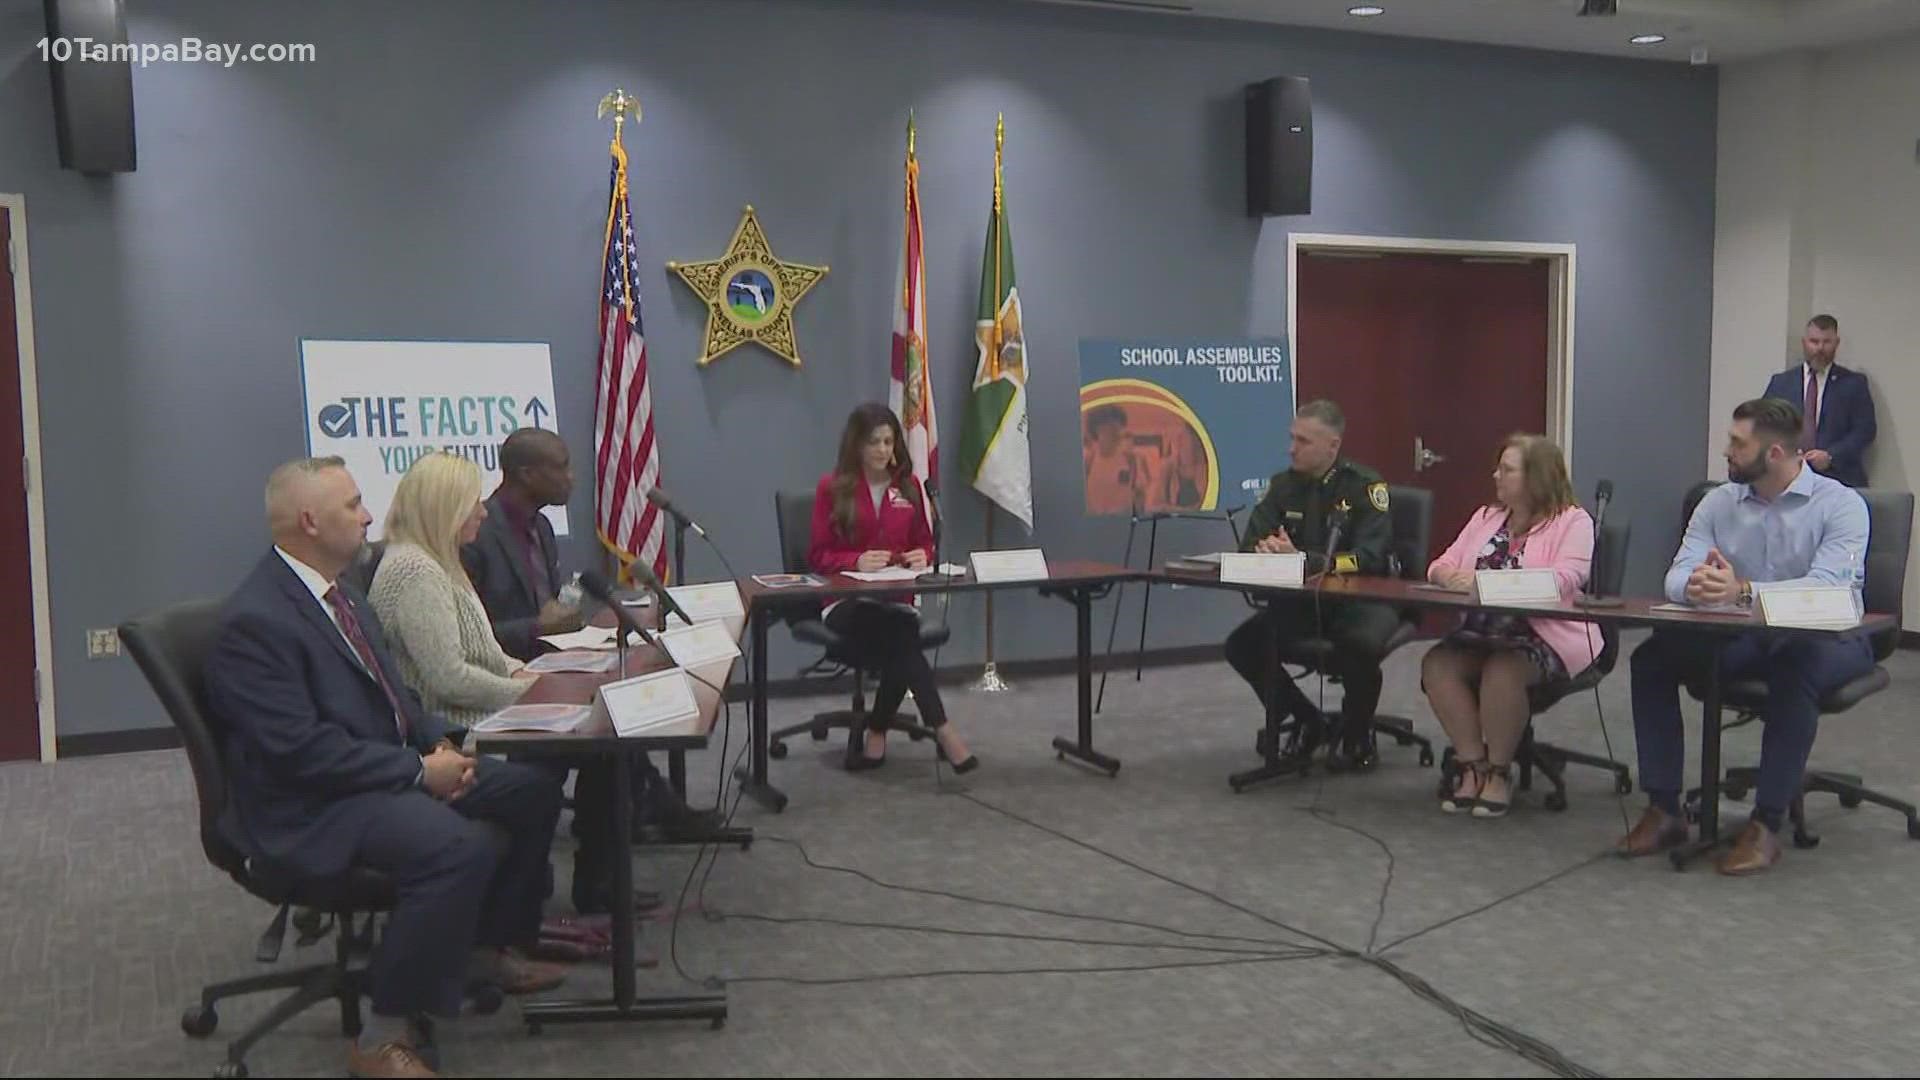 The first lady says the state will be rolling out school assemblies as part of its "The Facts Your Future" campaign.